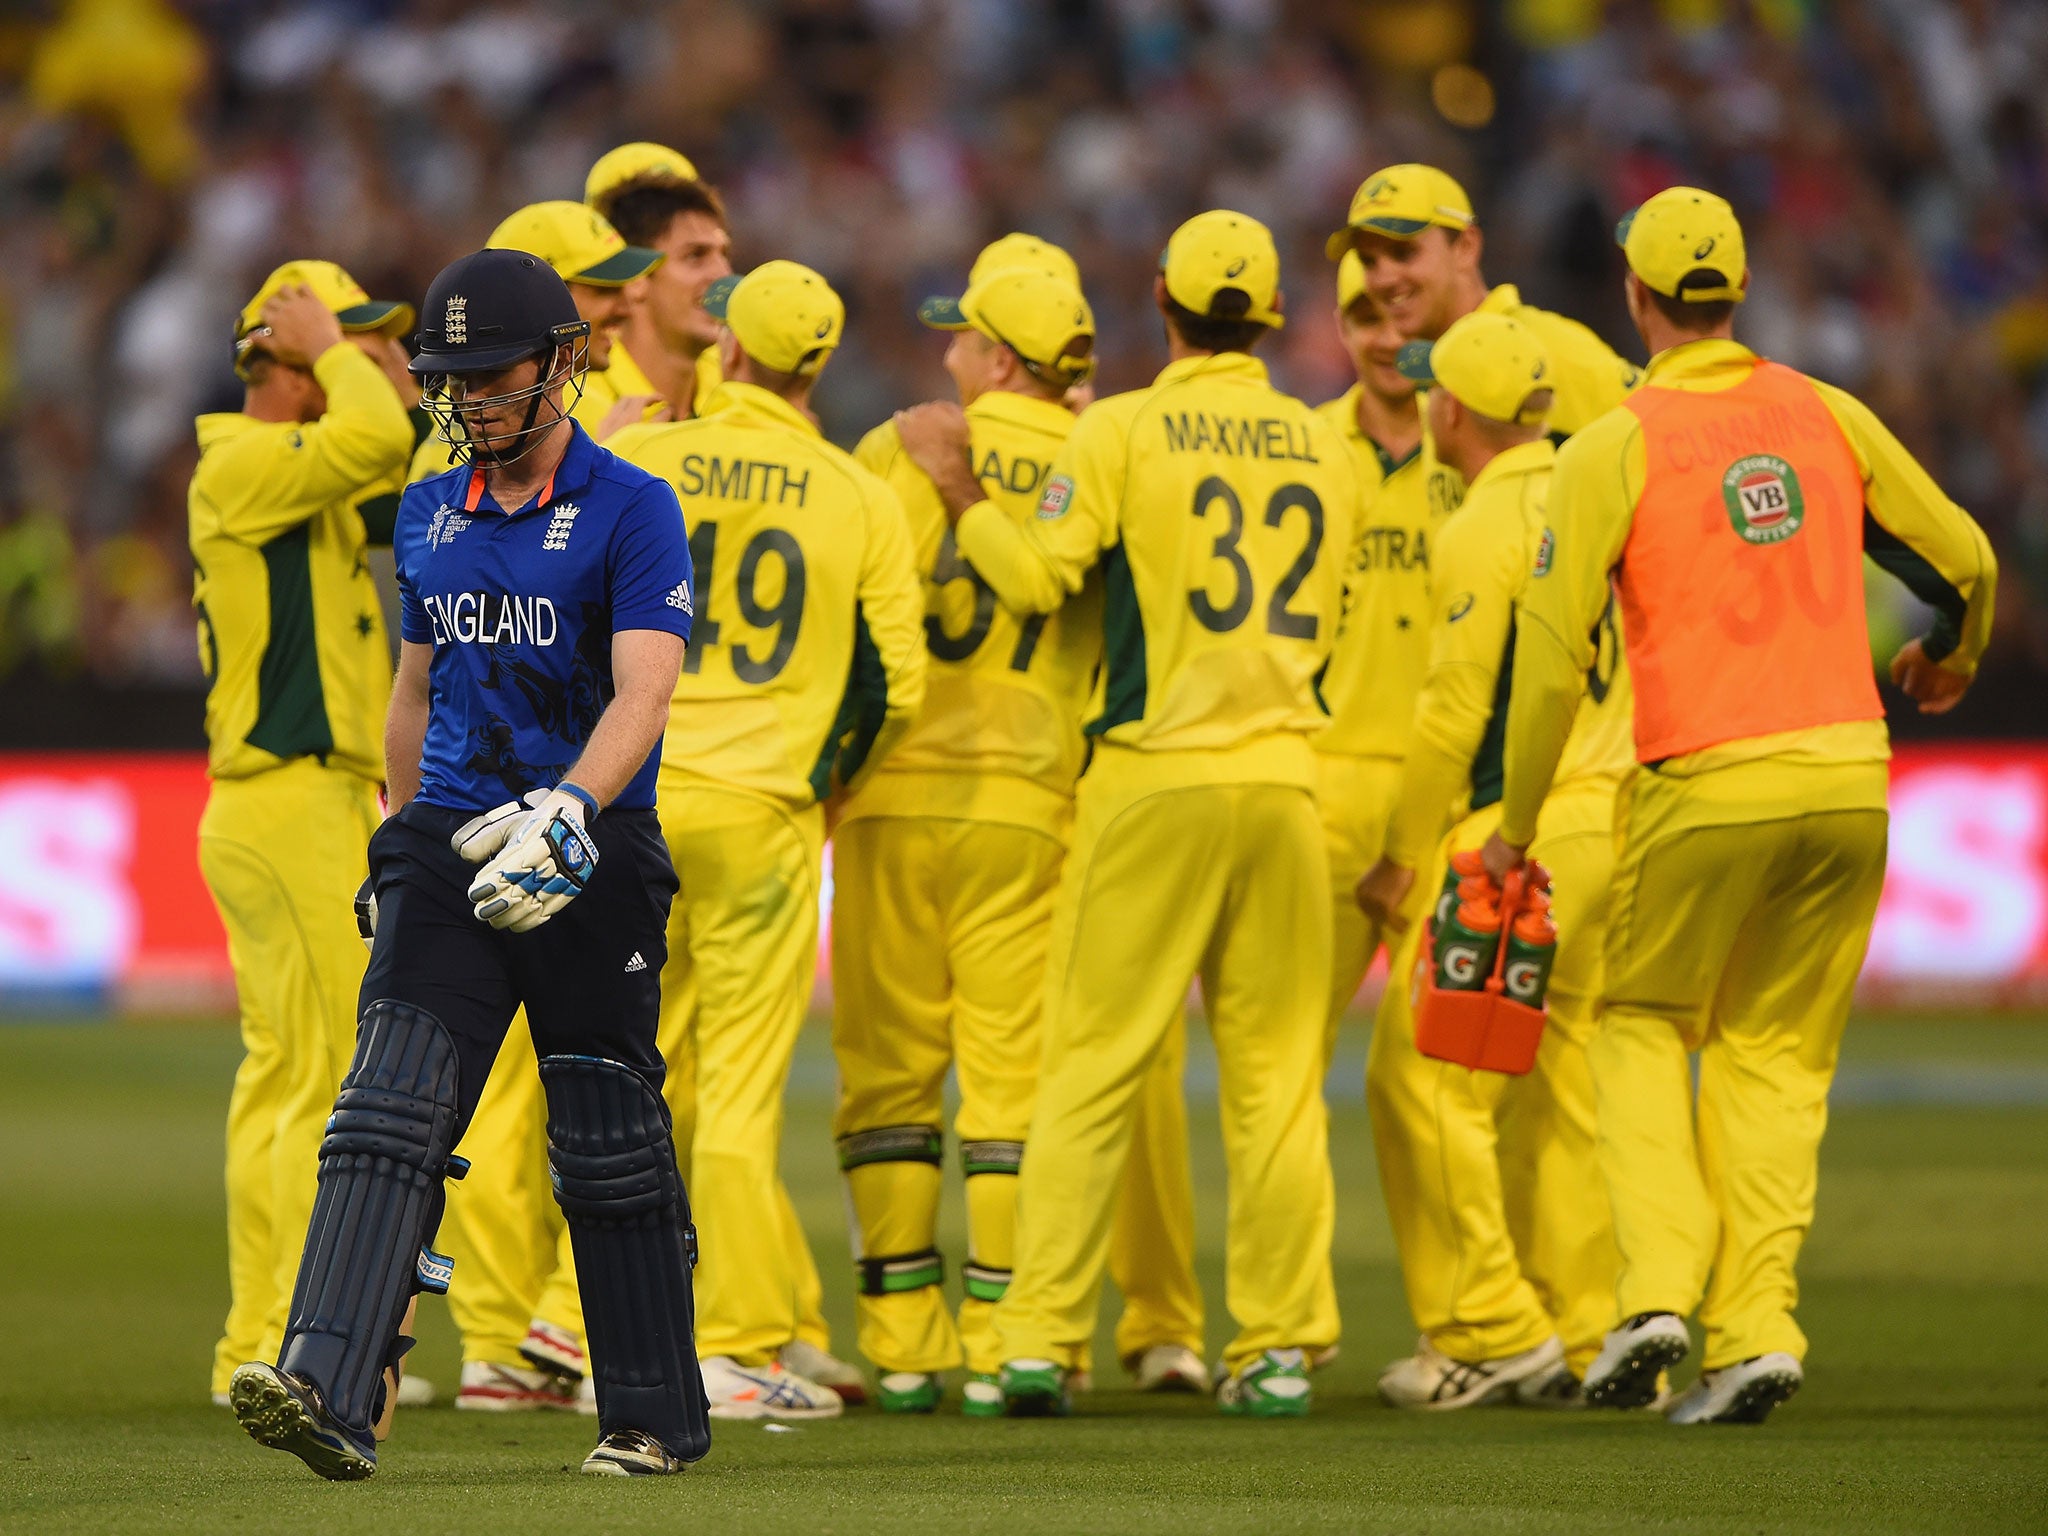 England captain Eoin Morgan heads back to the dressing room after losing his wicket to Mitchell Marsh